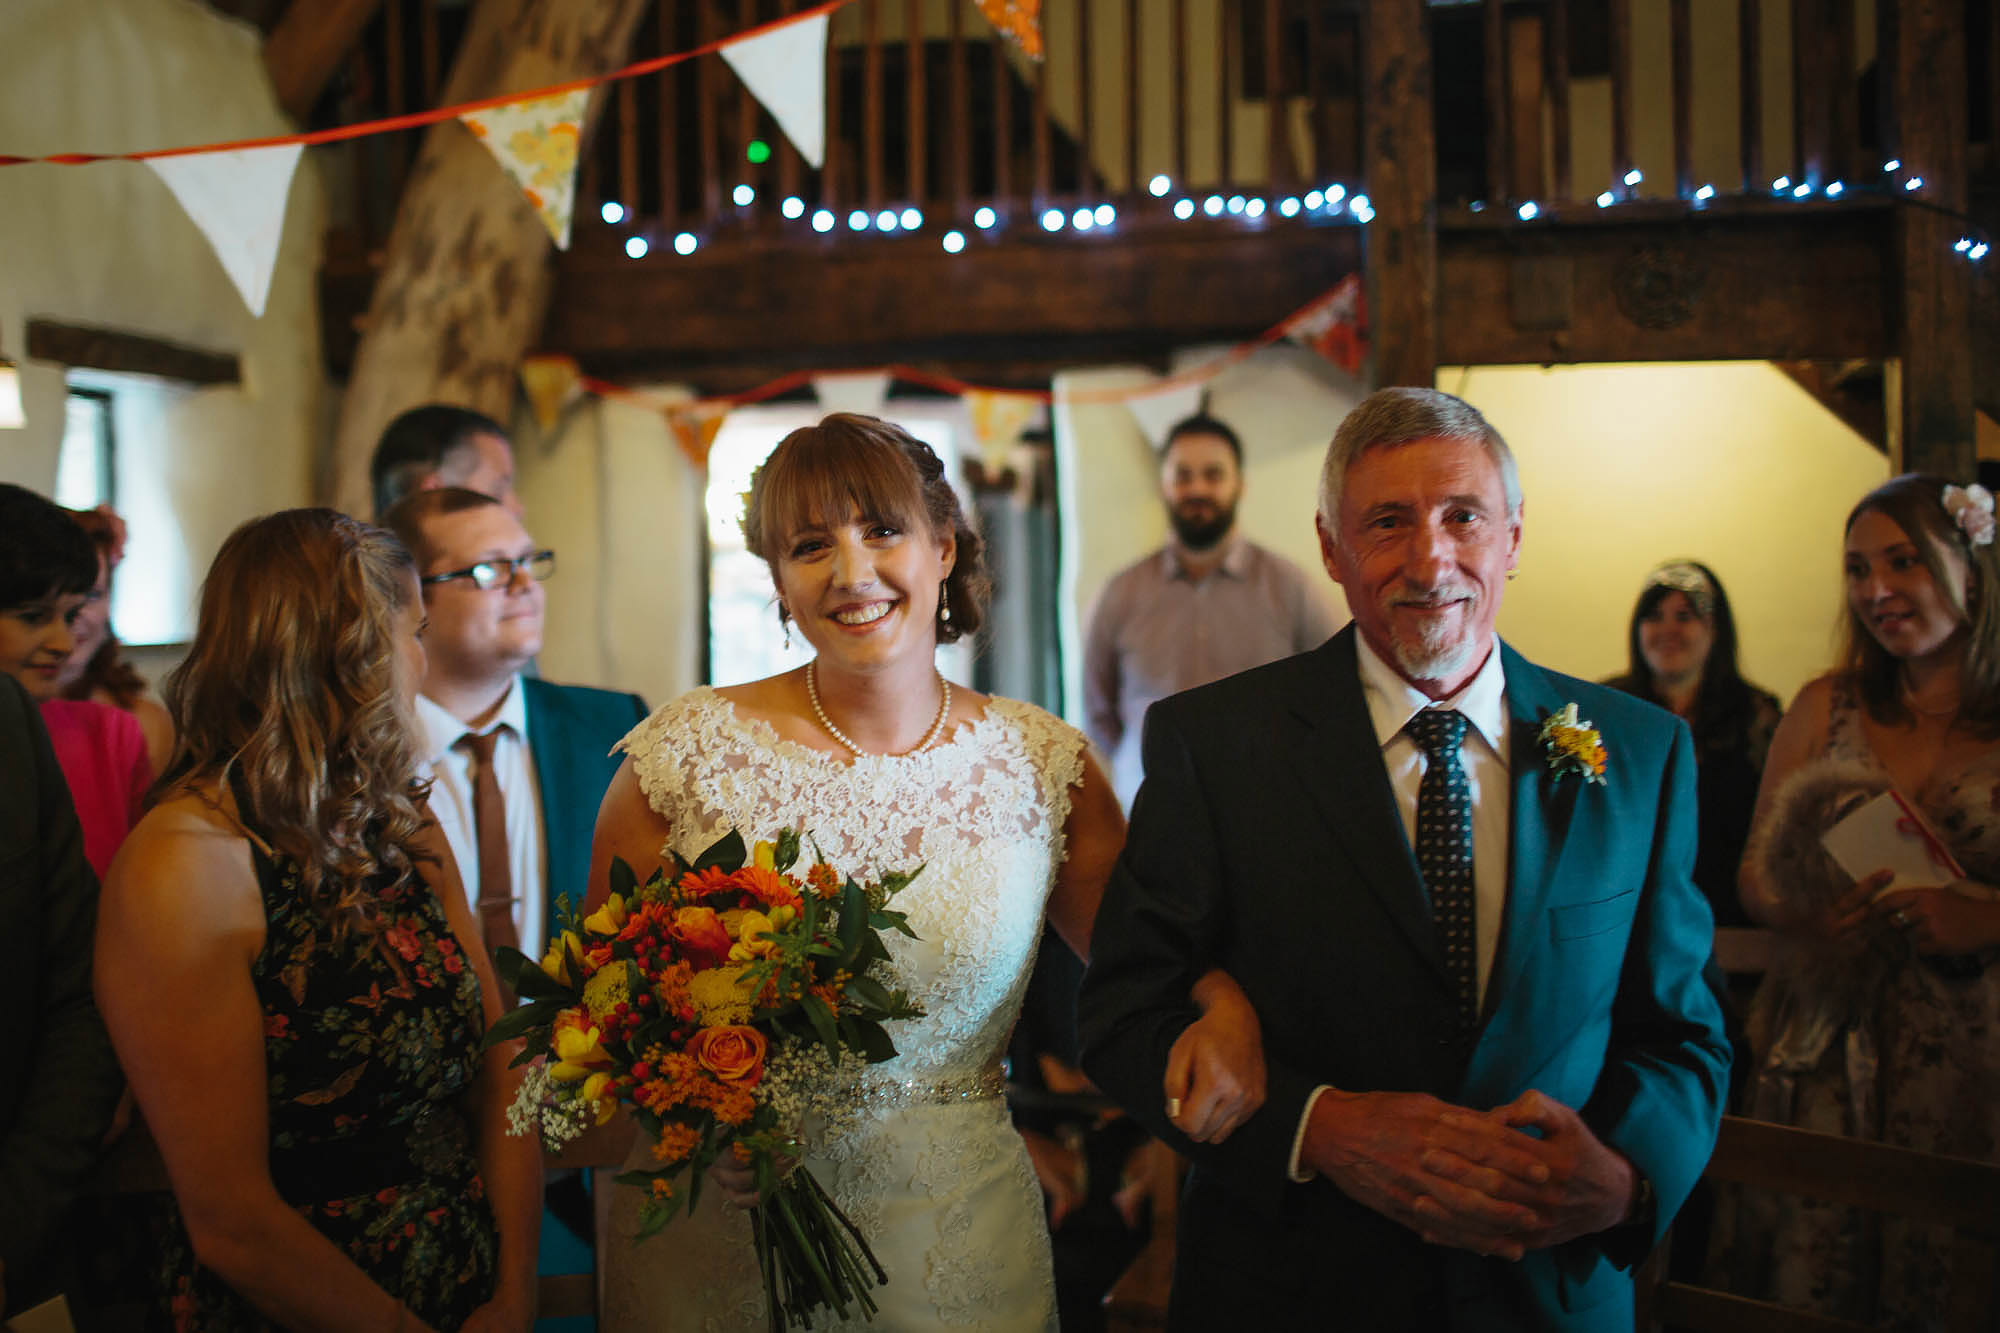 Bride and father walk down the aisle at Craven Arms Cruck Barn wedding